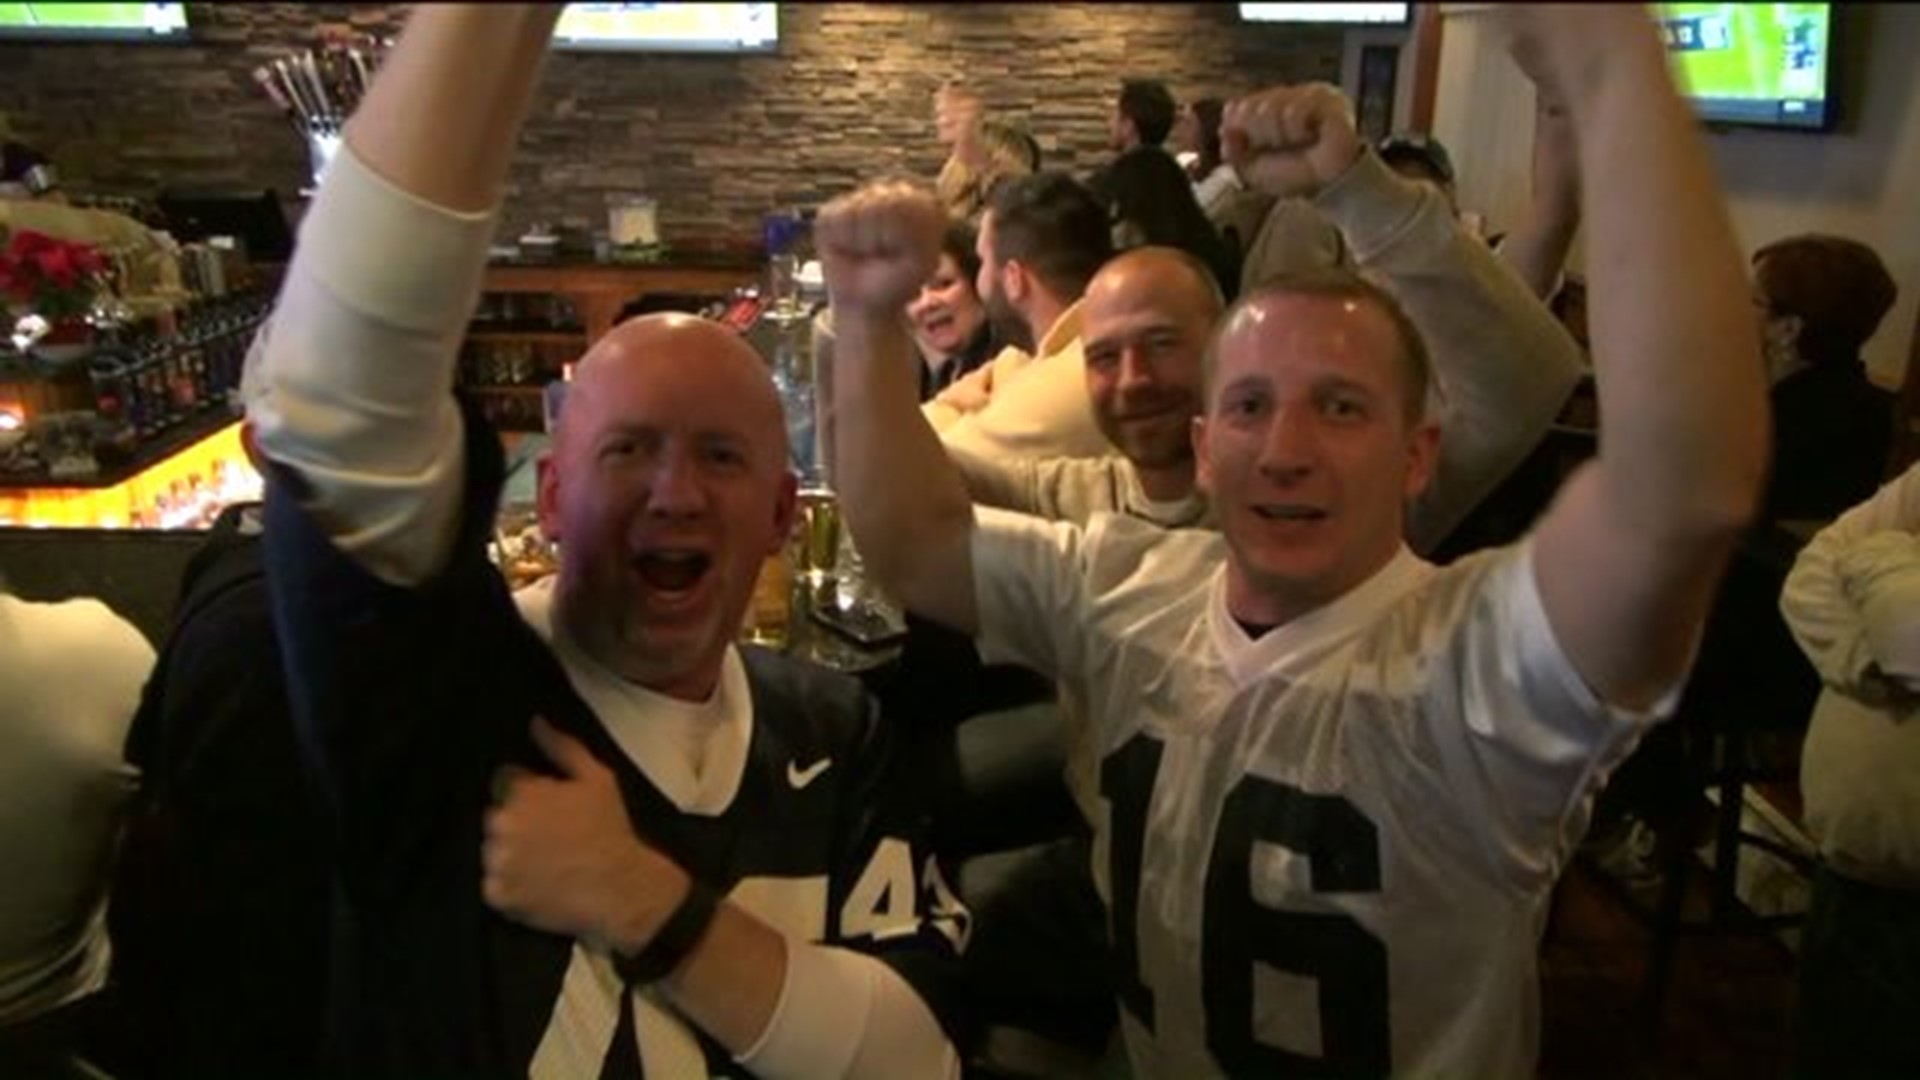 Nittany Lion Fans Revel in Big Ten Championship Appearance